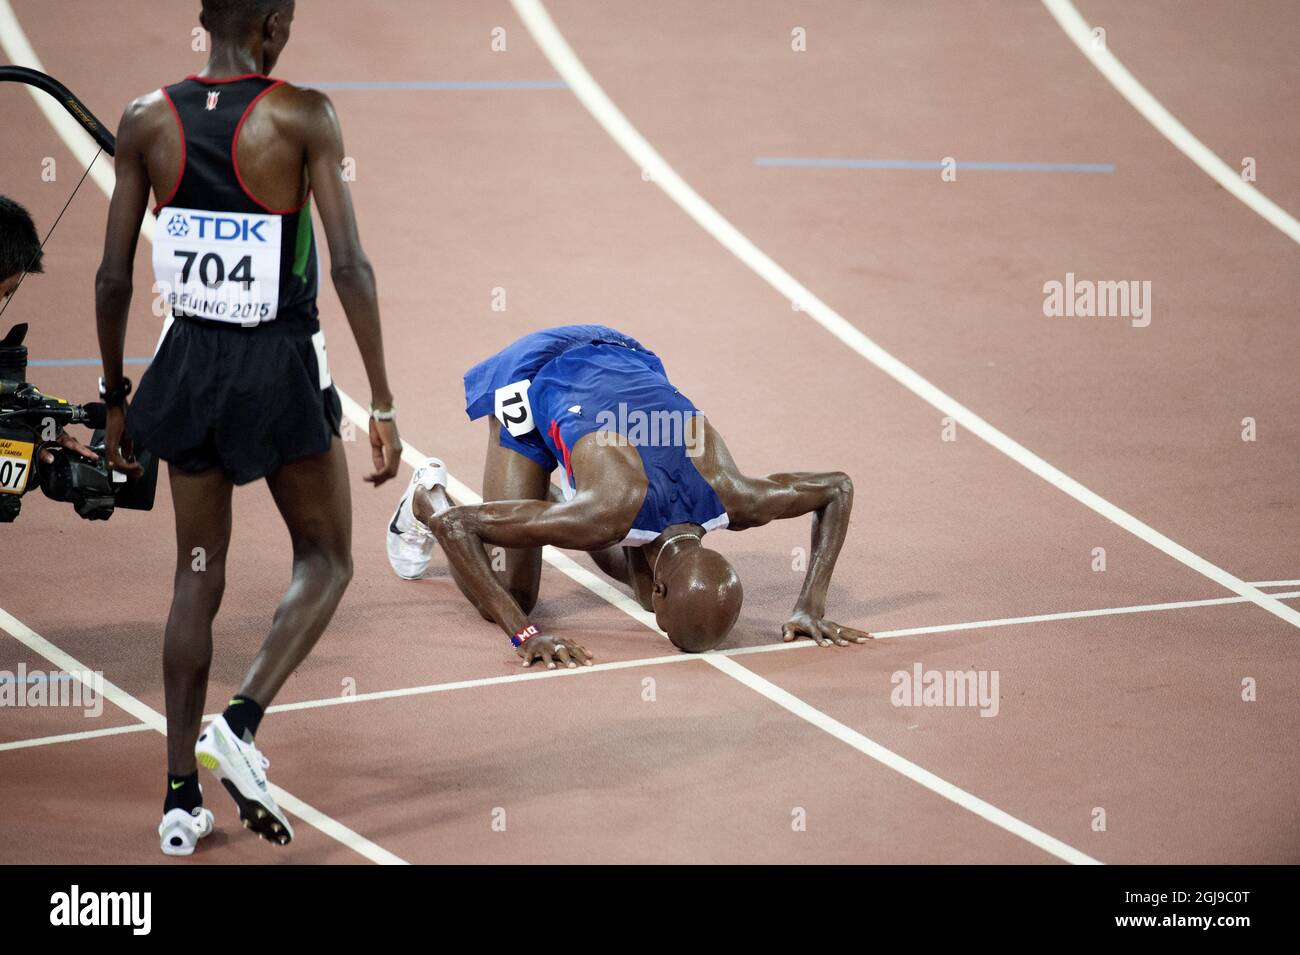 BEIJING 20150822 Mohamed Farah of Great Britain reacts after winning the men's 10000m final during the Beijing 2015 IAAF World Championships at the National Stadium in Beijing, China, August 22, 2015. Photo: Jessica Gow / TT / Kod 10070  Stock Photo